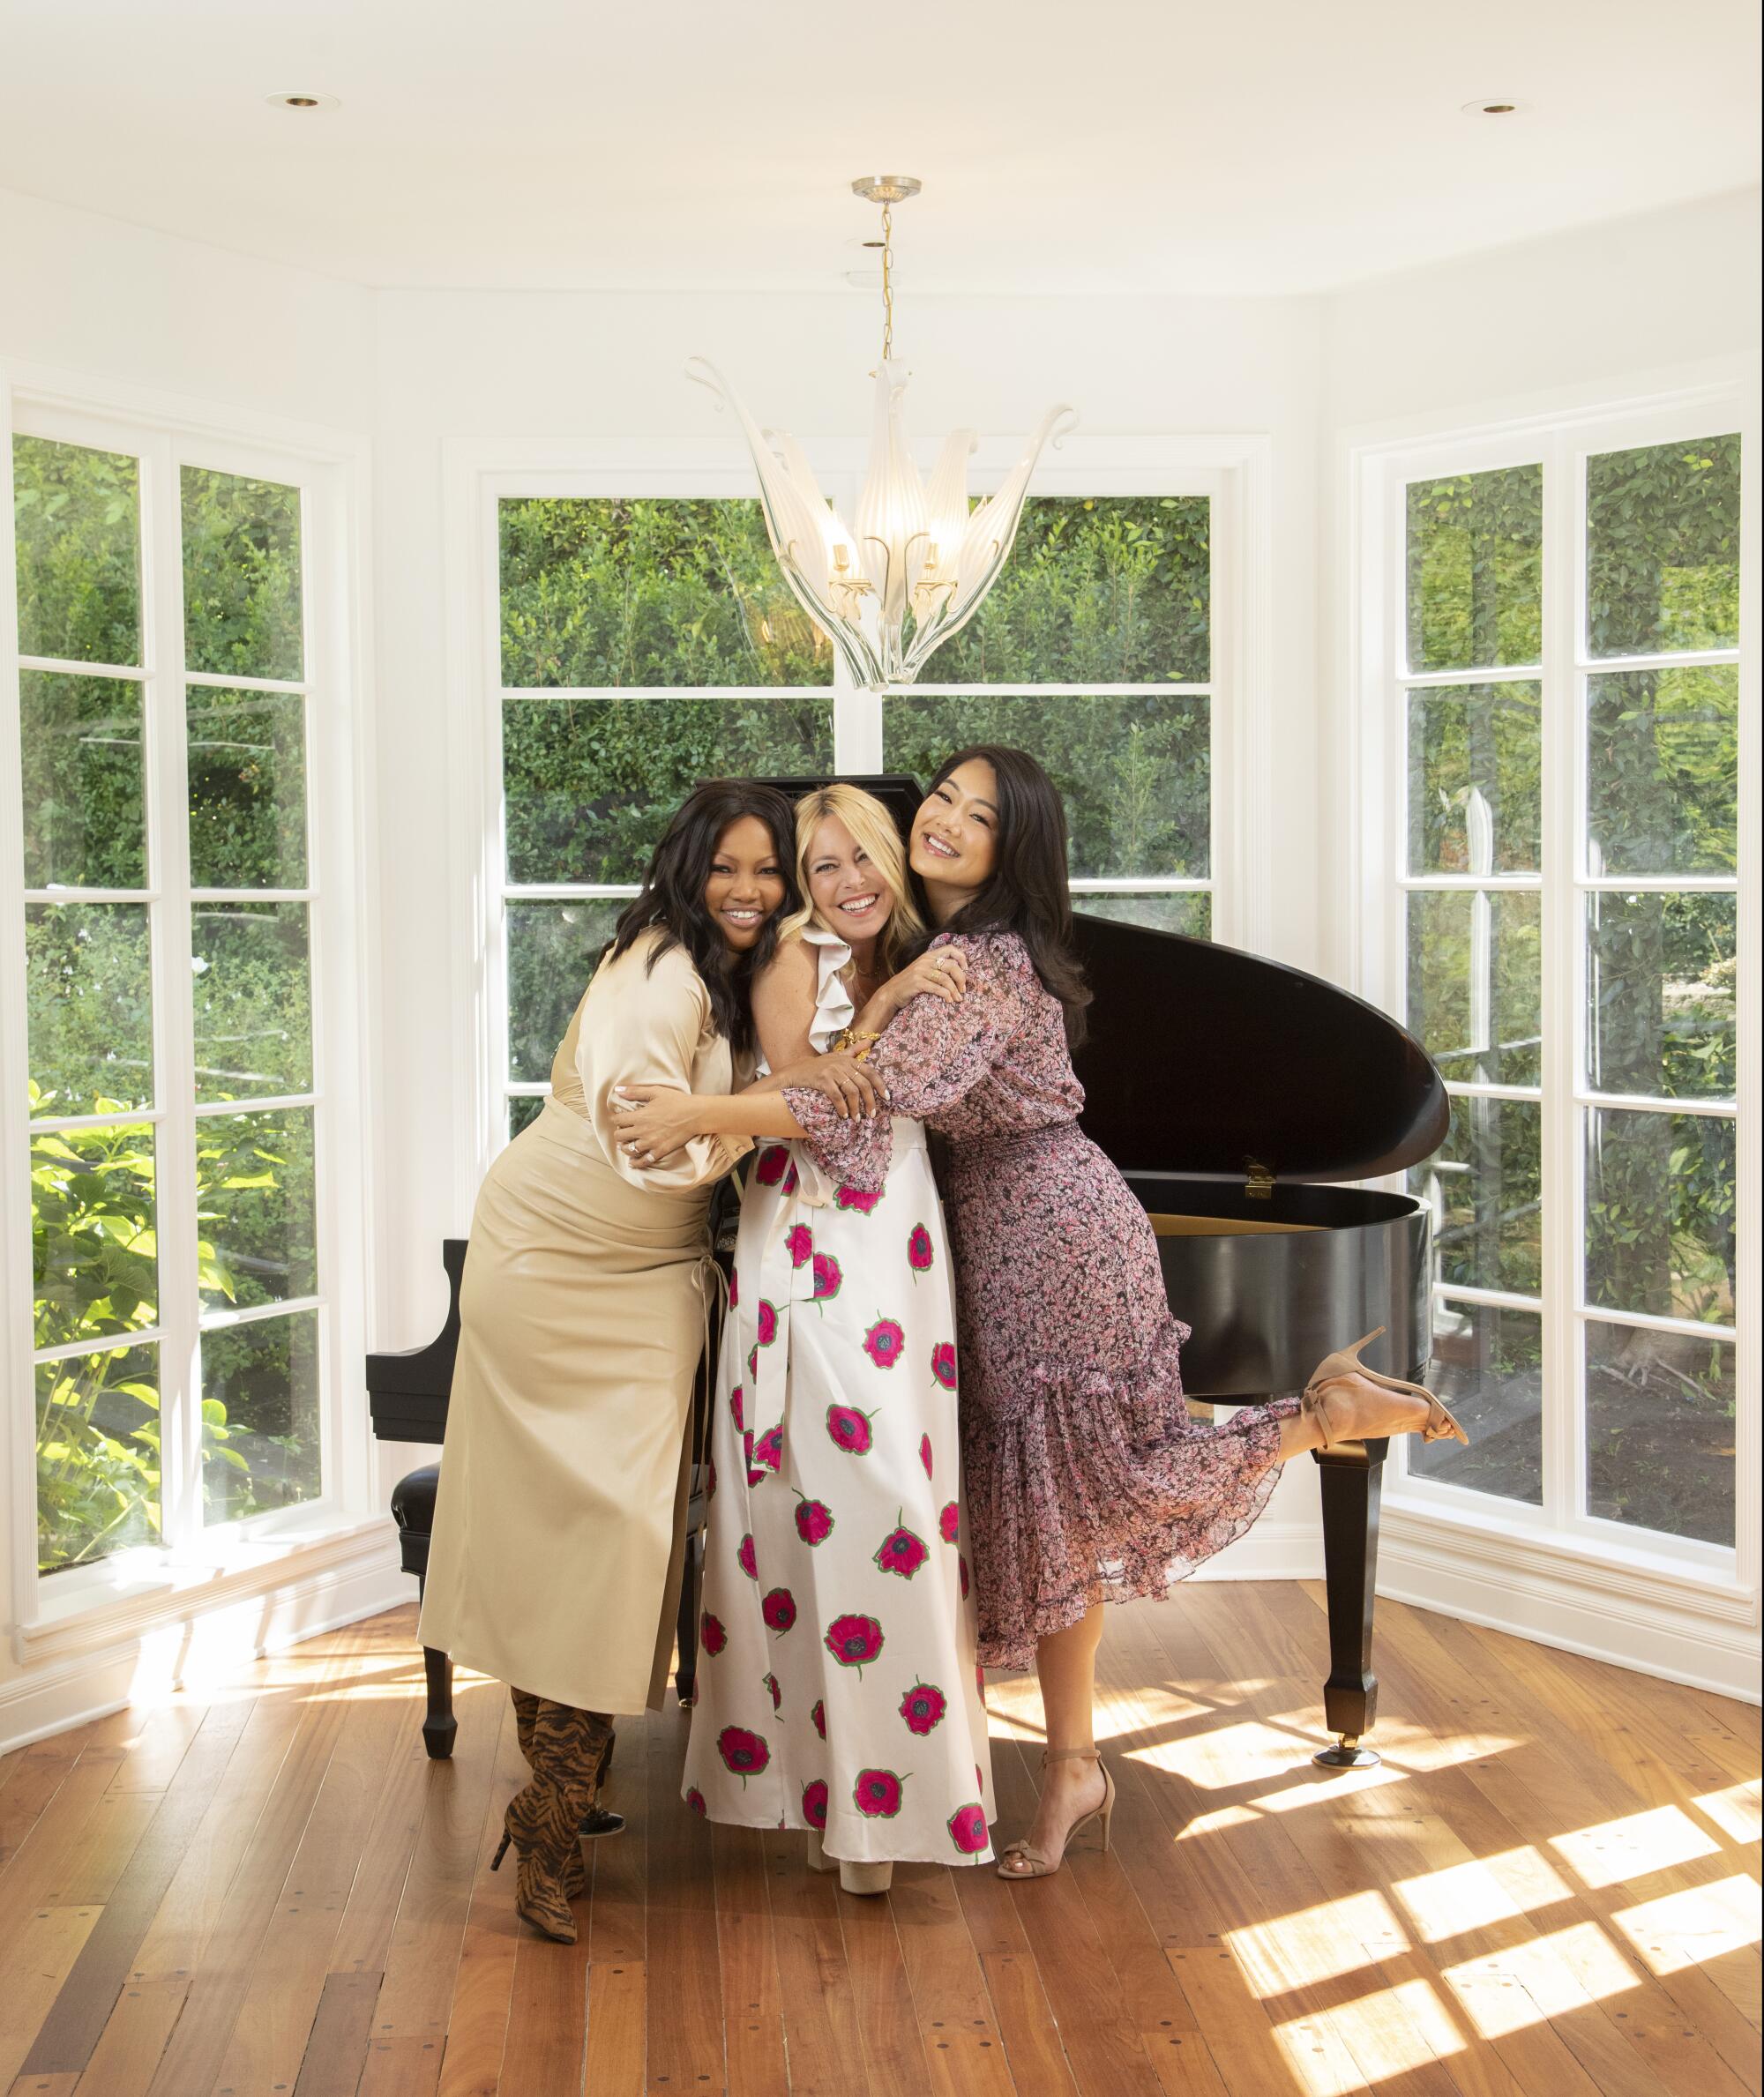 "Real Housewives of Beverly Hills" stars Garcelle Beauvais, Sutton Stracke and Crystal Kung Minkoff share a hug.